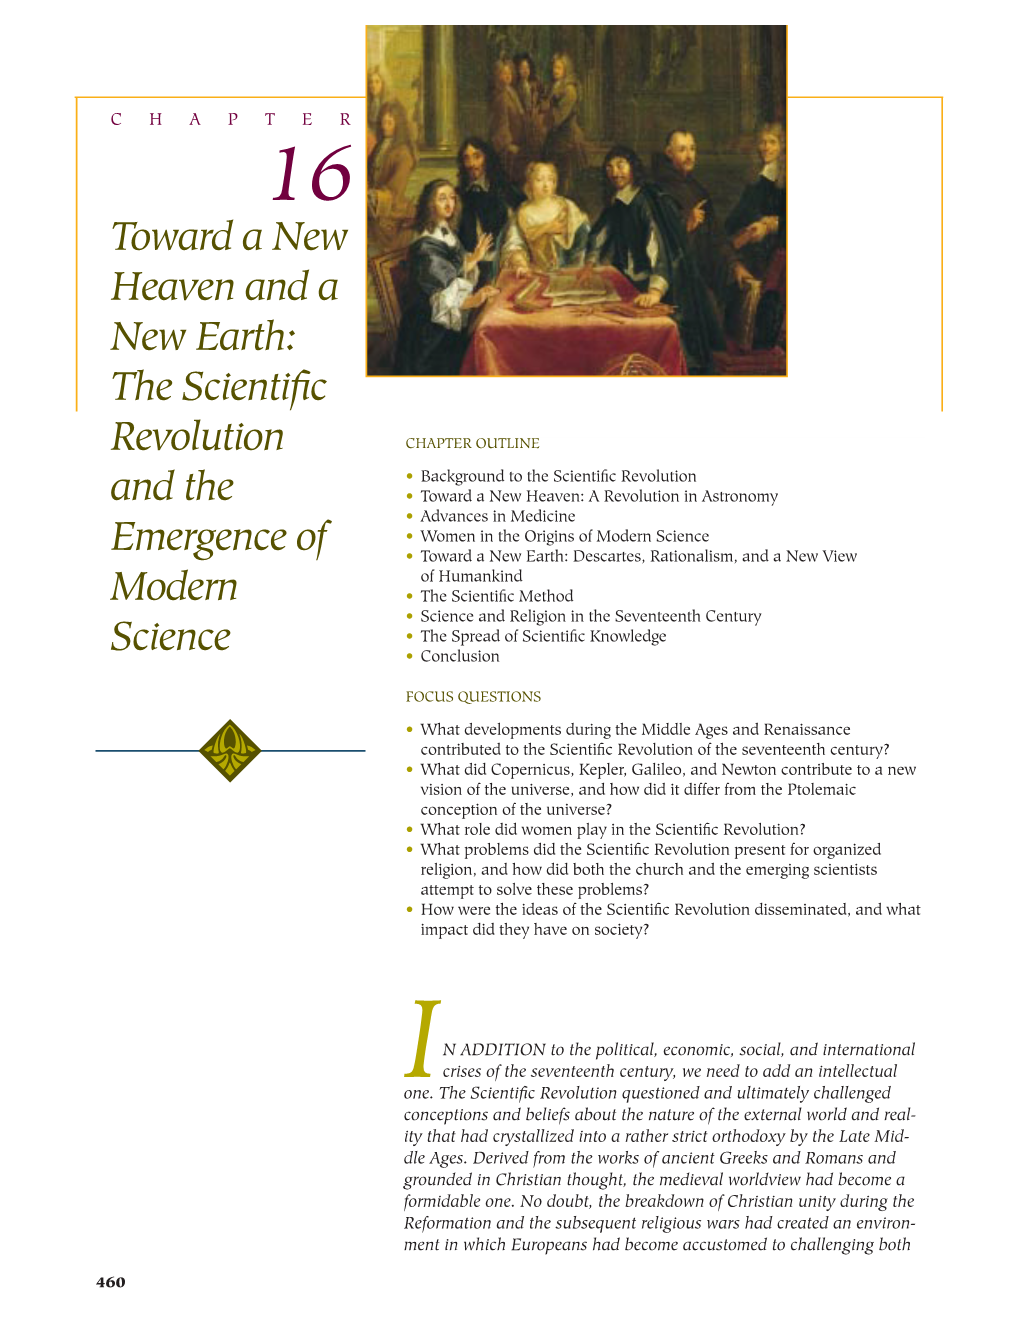 Toward a New Heaven and a New Earth: the Scientific Revolution and the Emergence of Modern Science